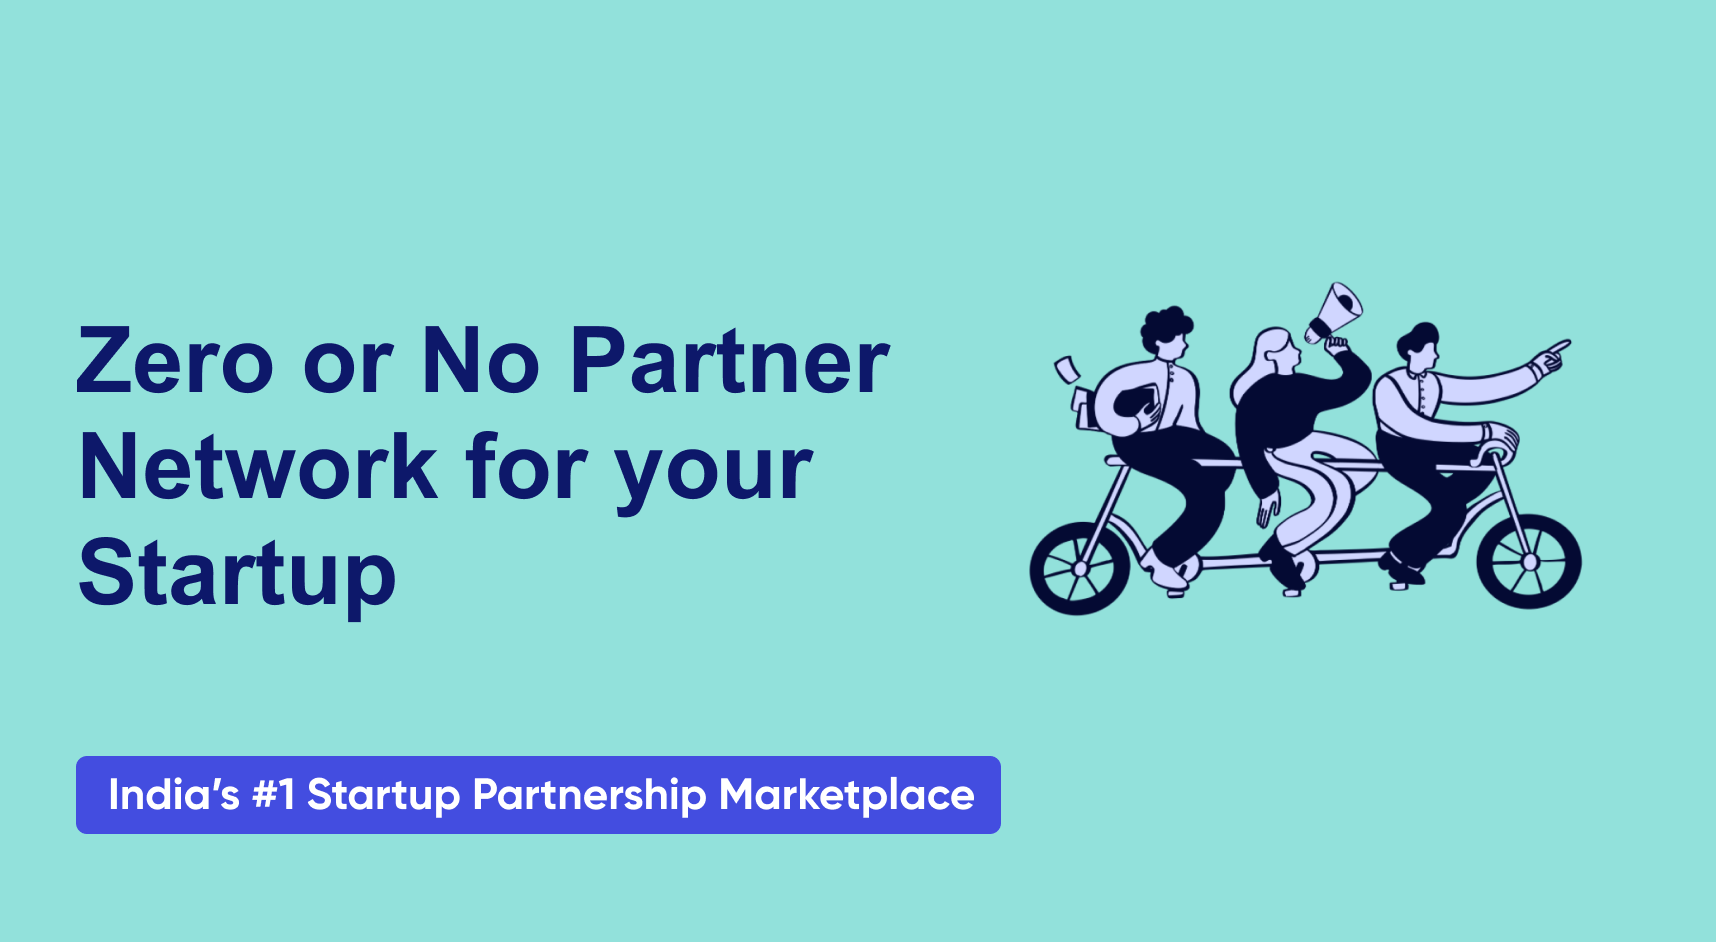 Why is Partner Network Essential for Your Startup?